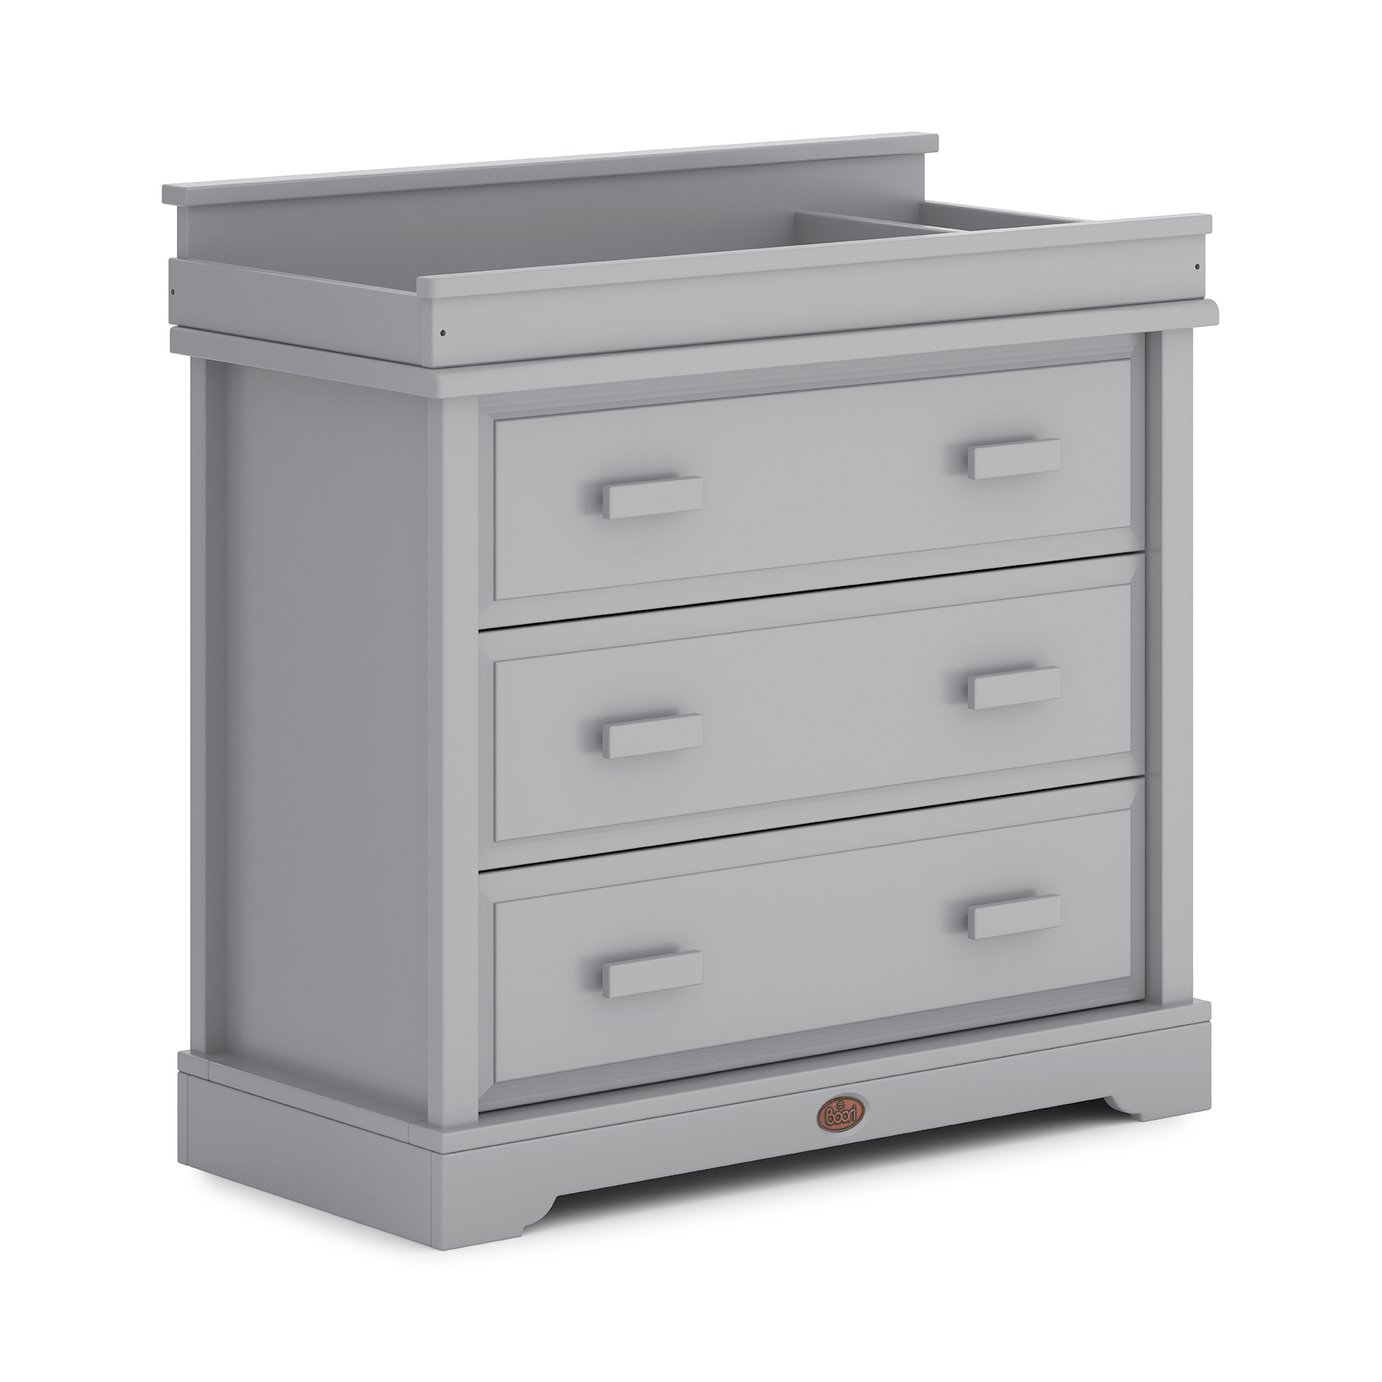 Boori Dresser and Changing Station - Pebble